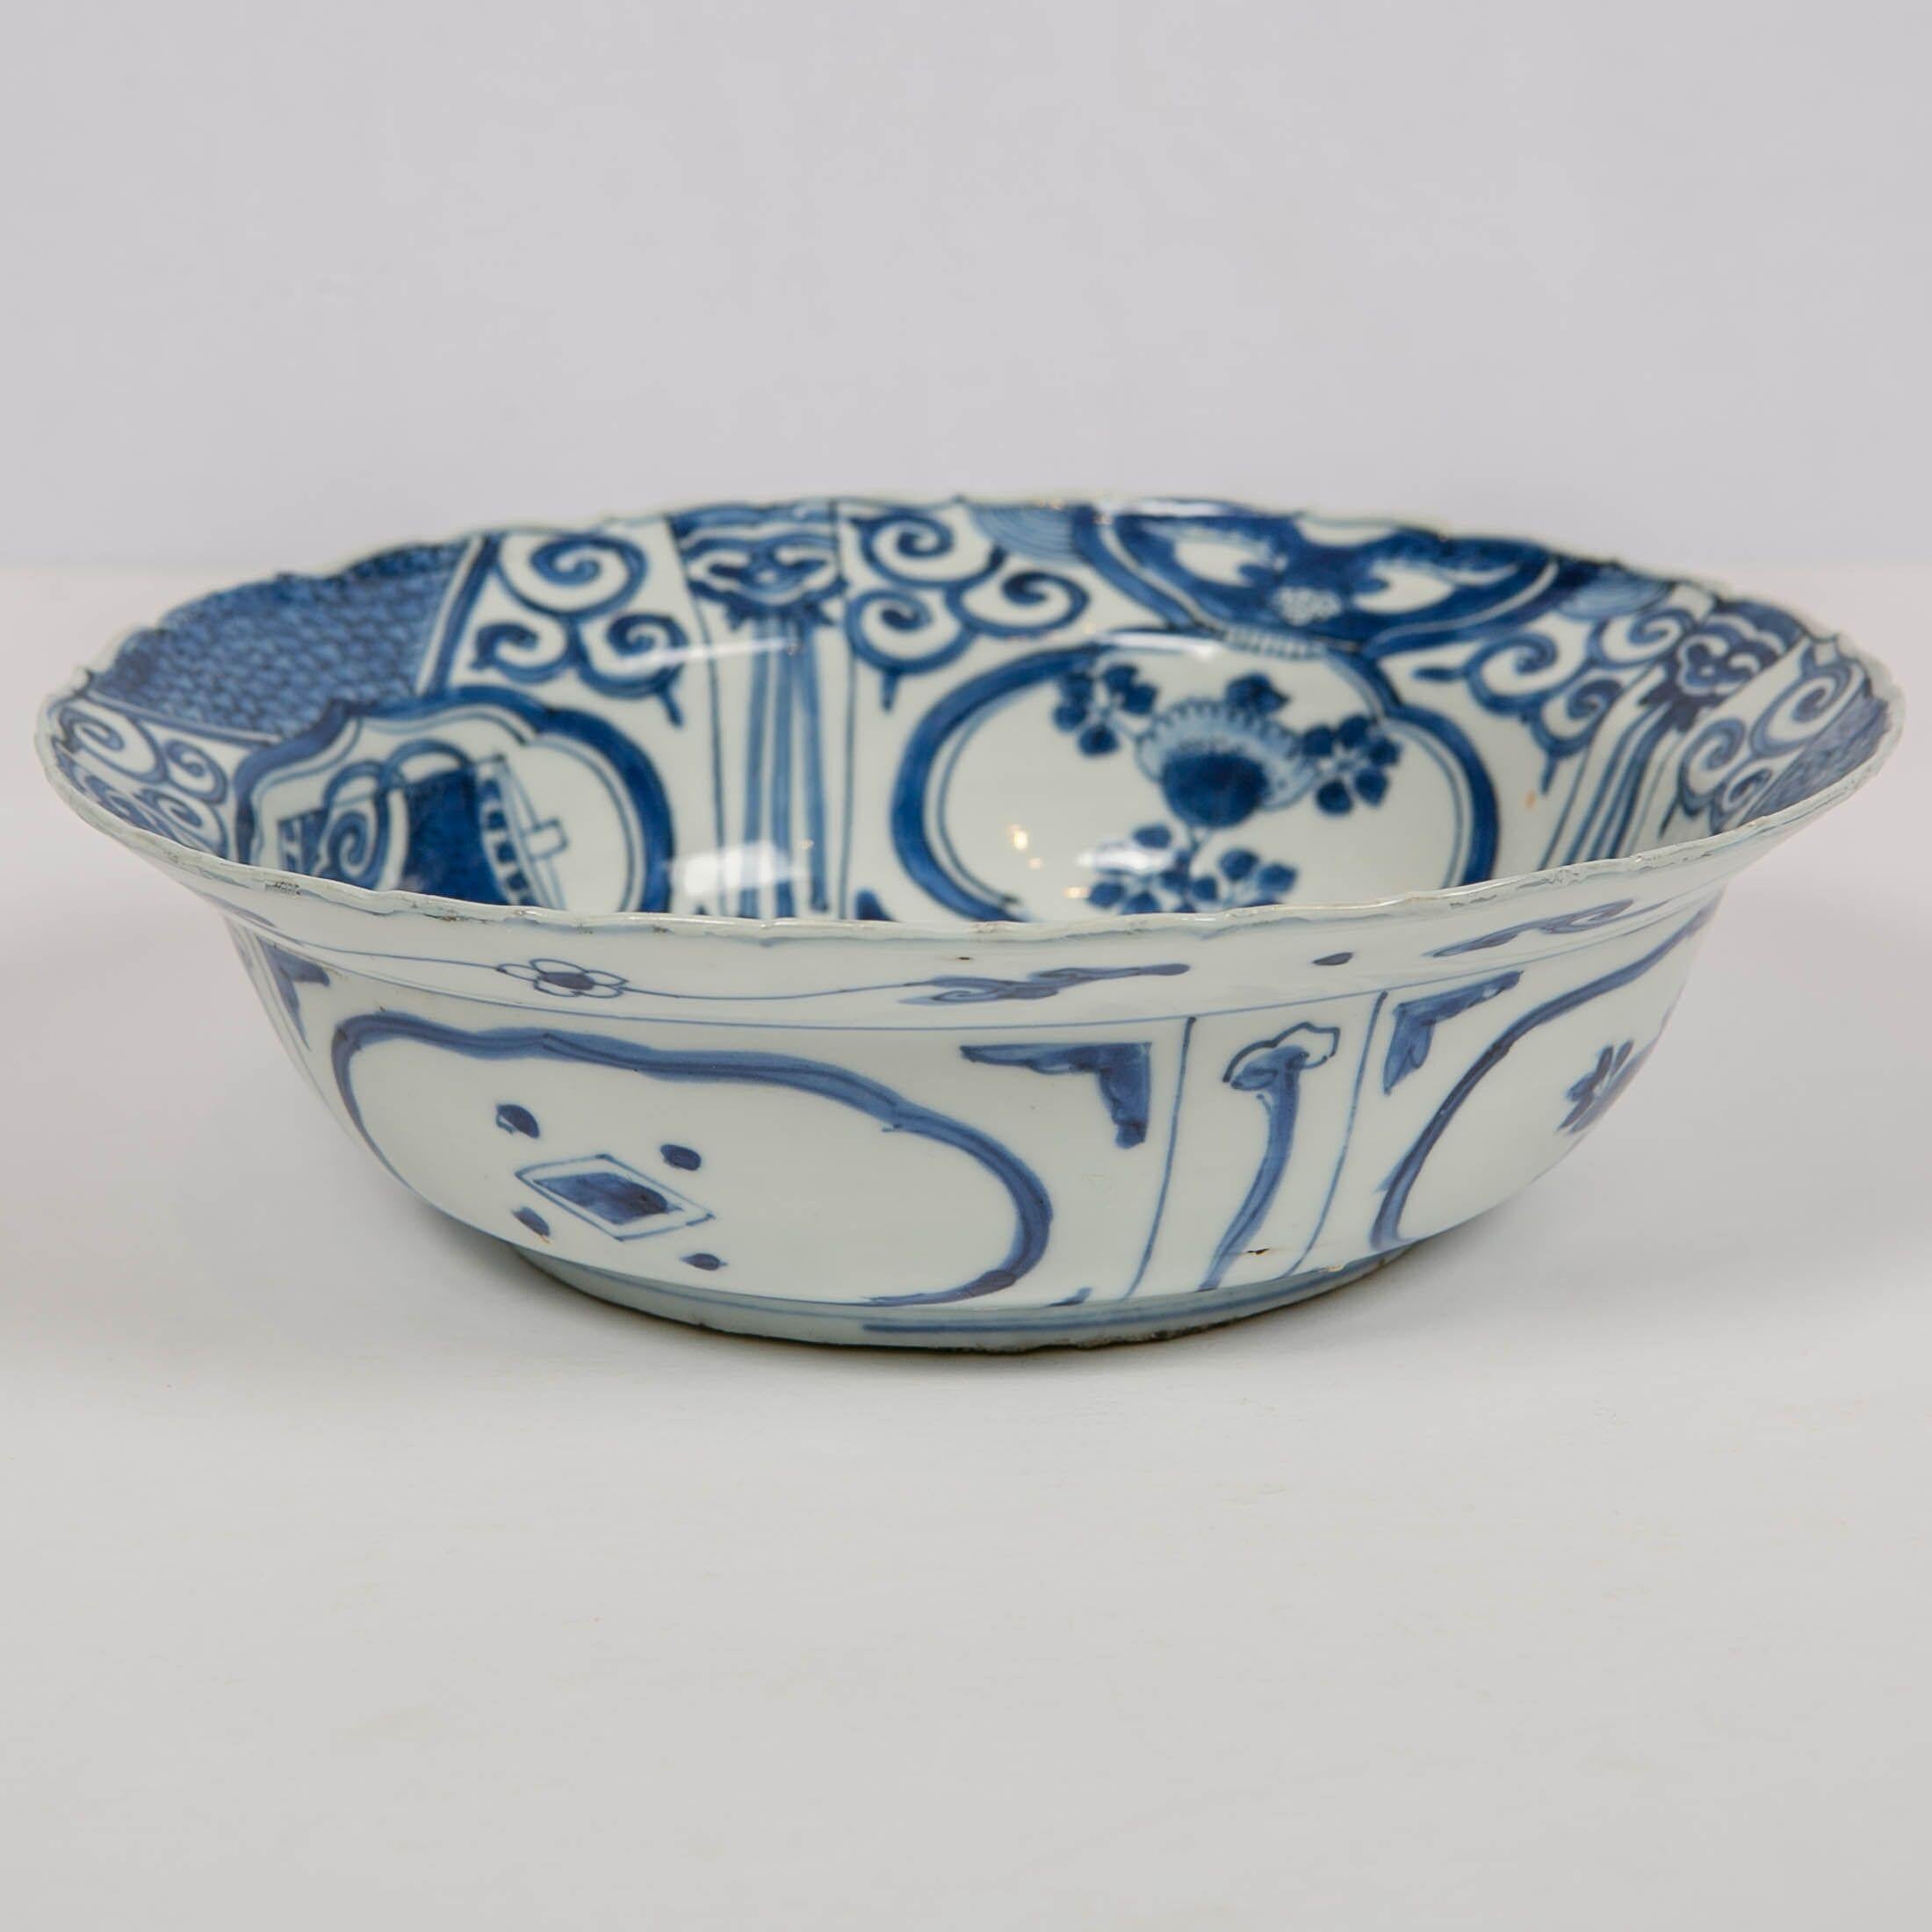 Porcelain Chinese Blue and White Klapmuts Bowl Made in Reign of Chongzhen Emperor